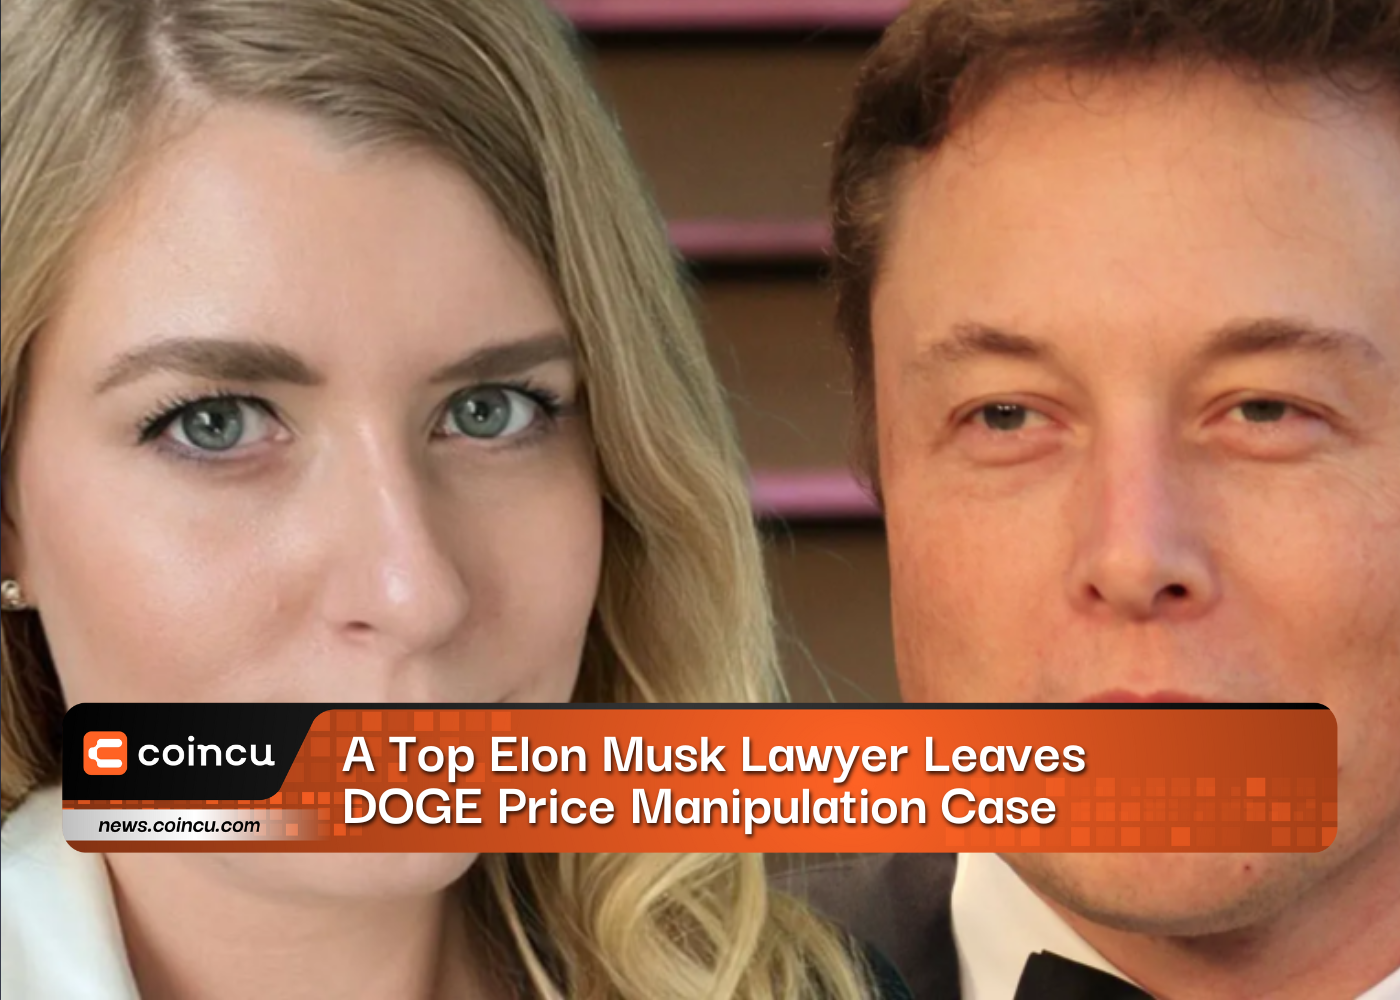 A Top Elon Musk Lawyer Leaves DOGE Price Manipulation Case